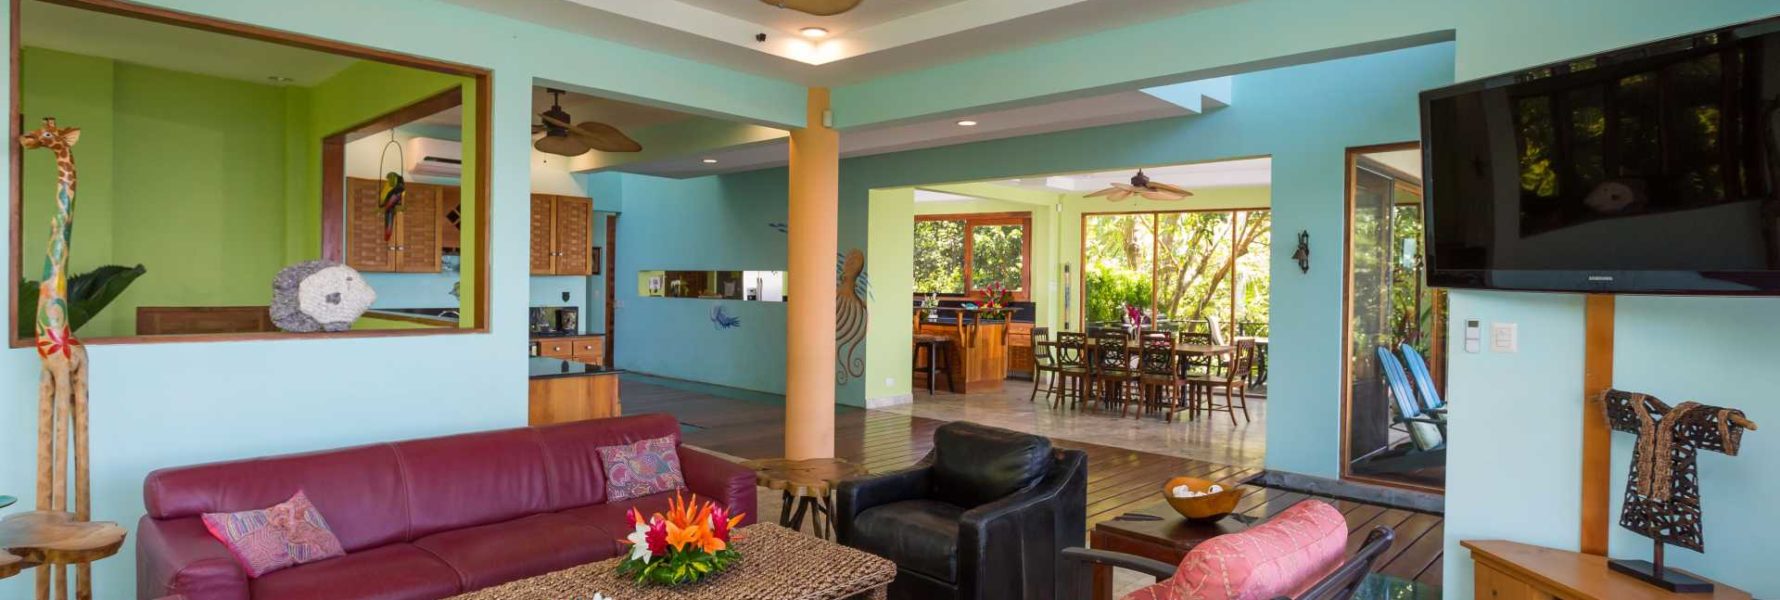 The common areas include a large entertainment area, bar, and dining room. A vacation villa for any occasion.